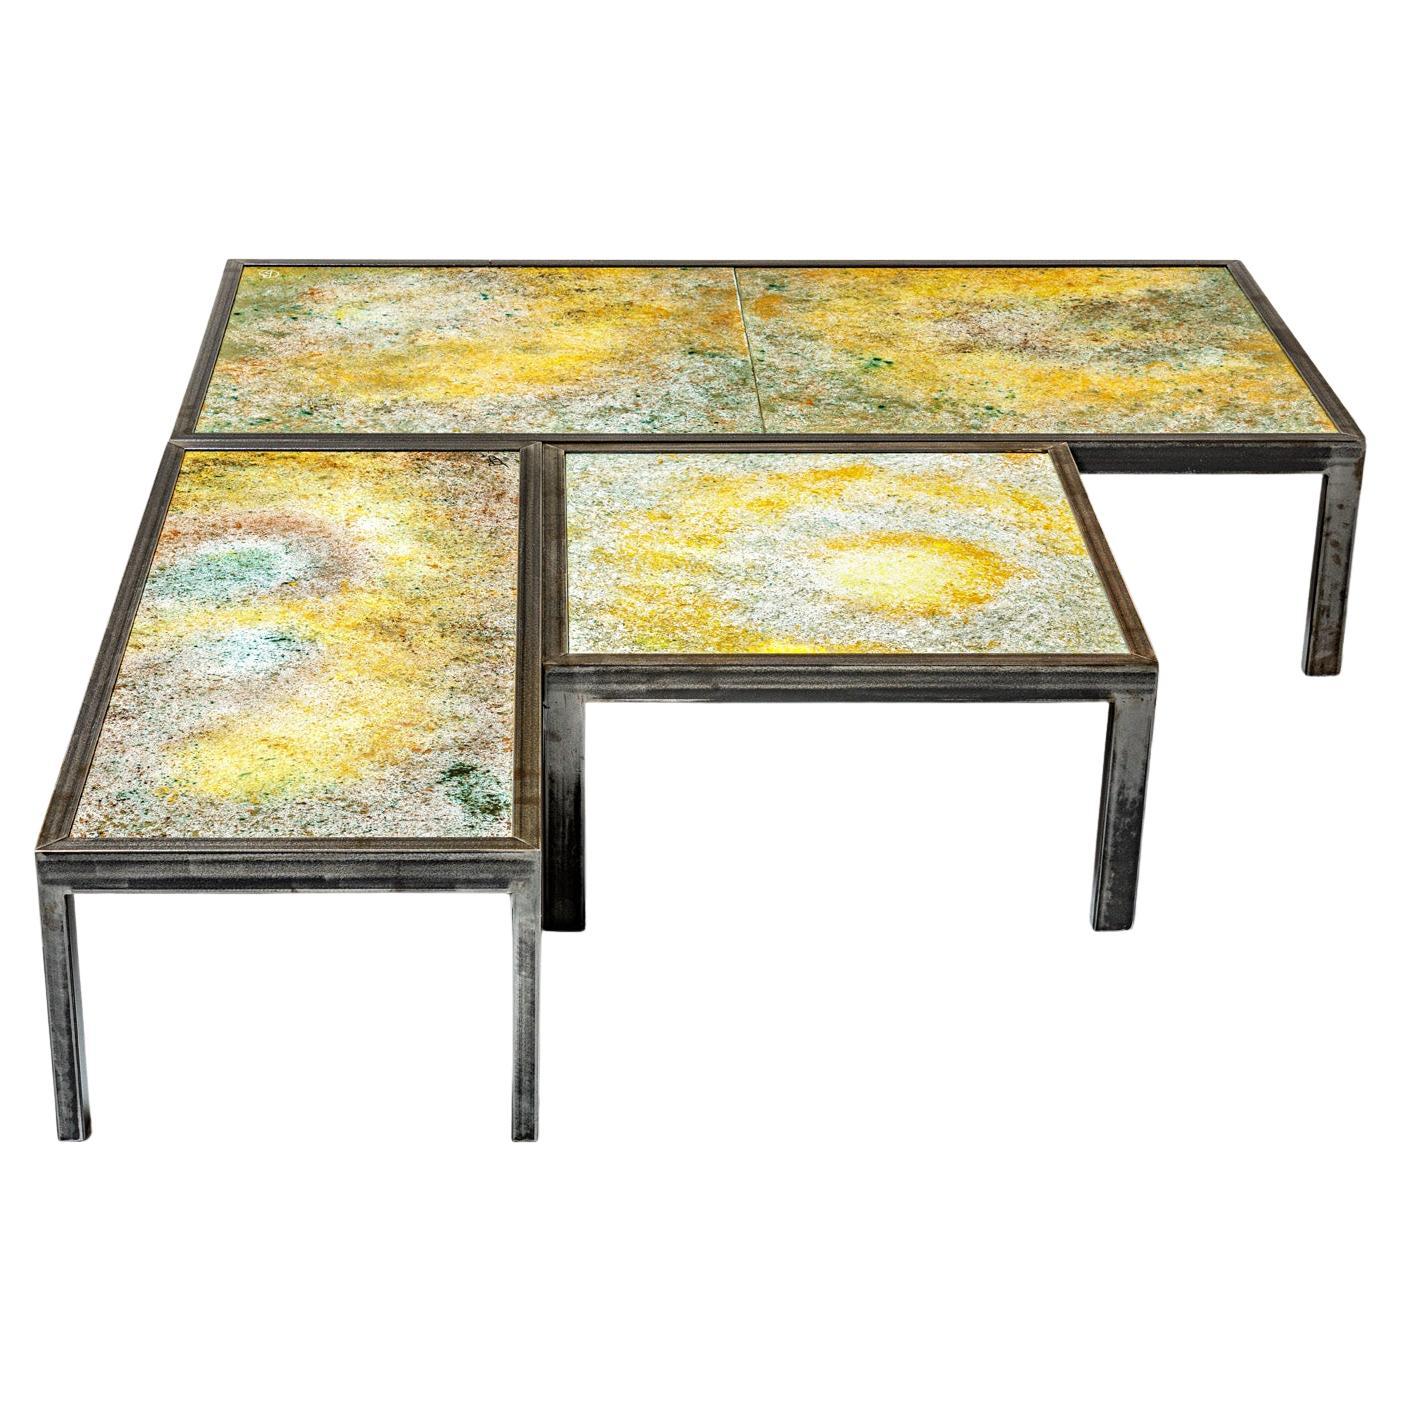 Set of 3 Large 20th Century Colored Ceramic Low Tables by Bernard Buffat 1970 For Sale